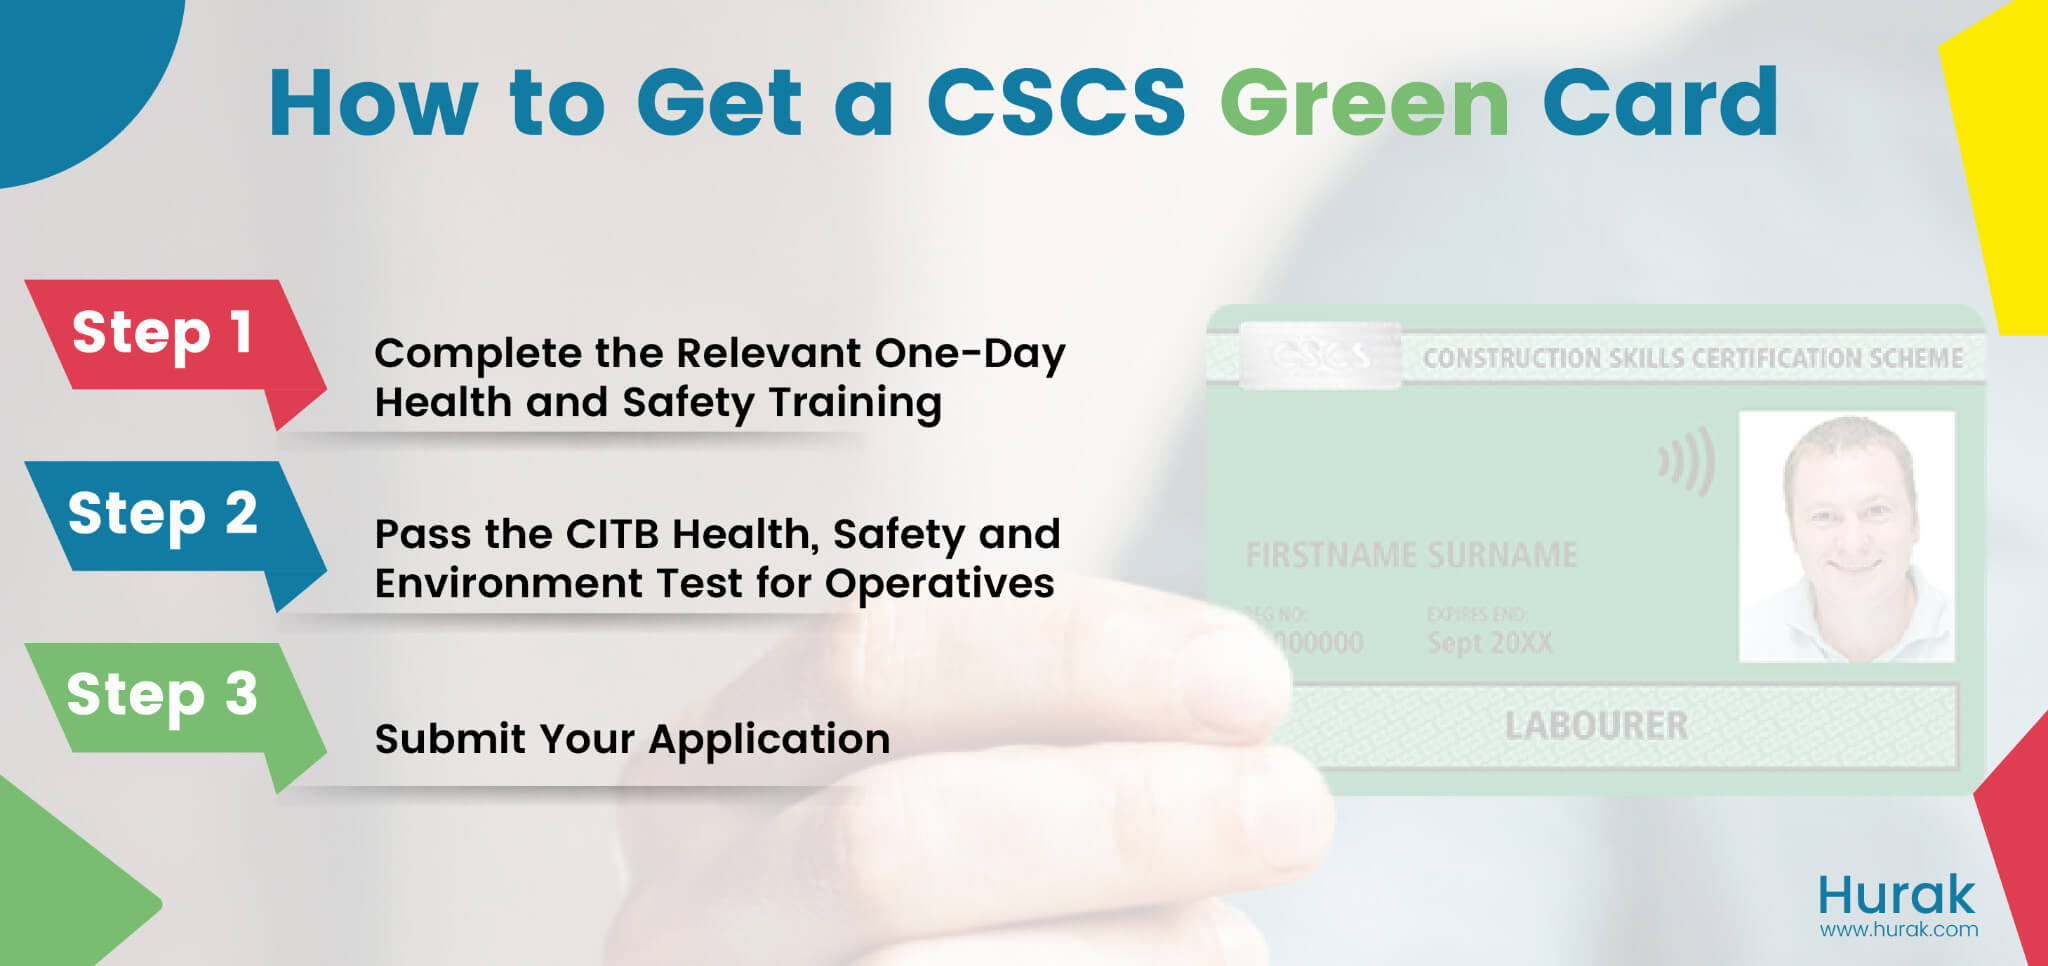 How to Get a CSCS Green Card